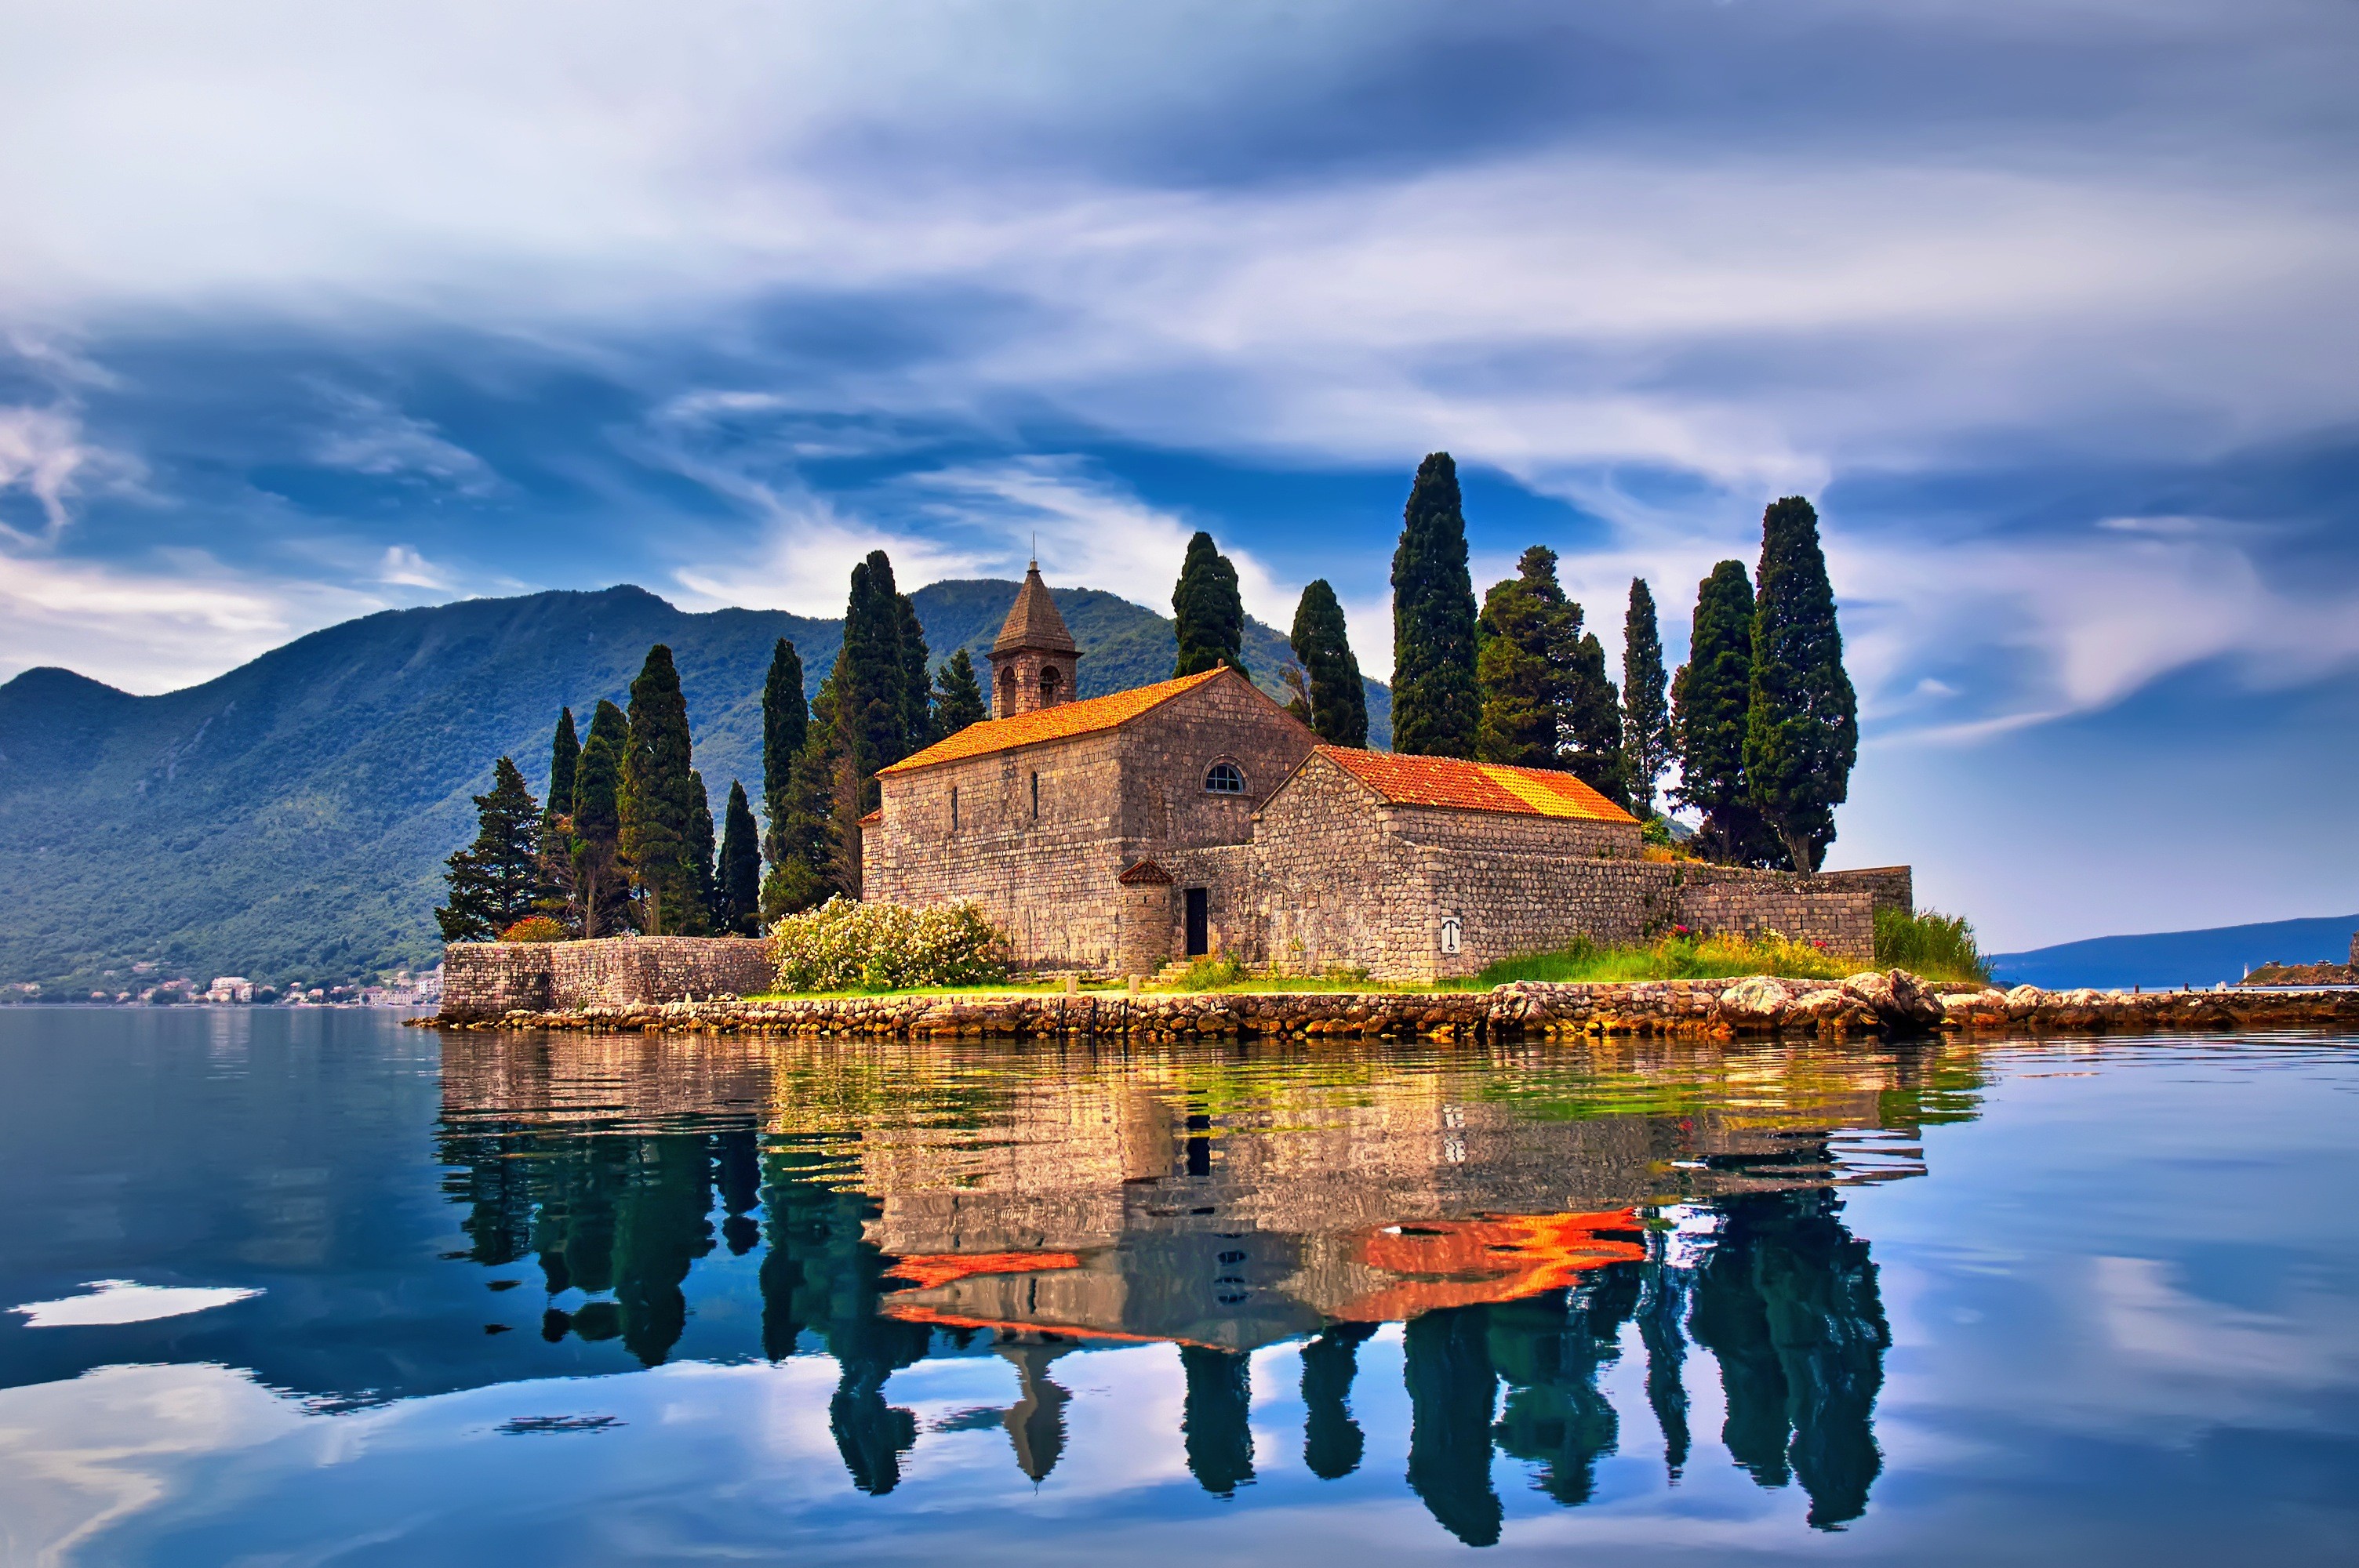 General 3008x2000 architecture old building ancient Montenegro island landscape mountains clouds nature trees church rocks reflection hills water lake house Mediterranean Sea Bay of Kotor